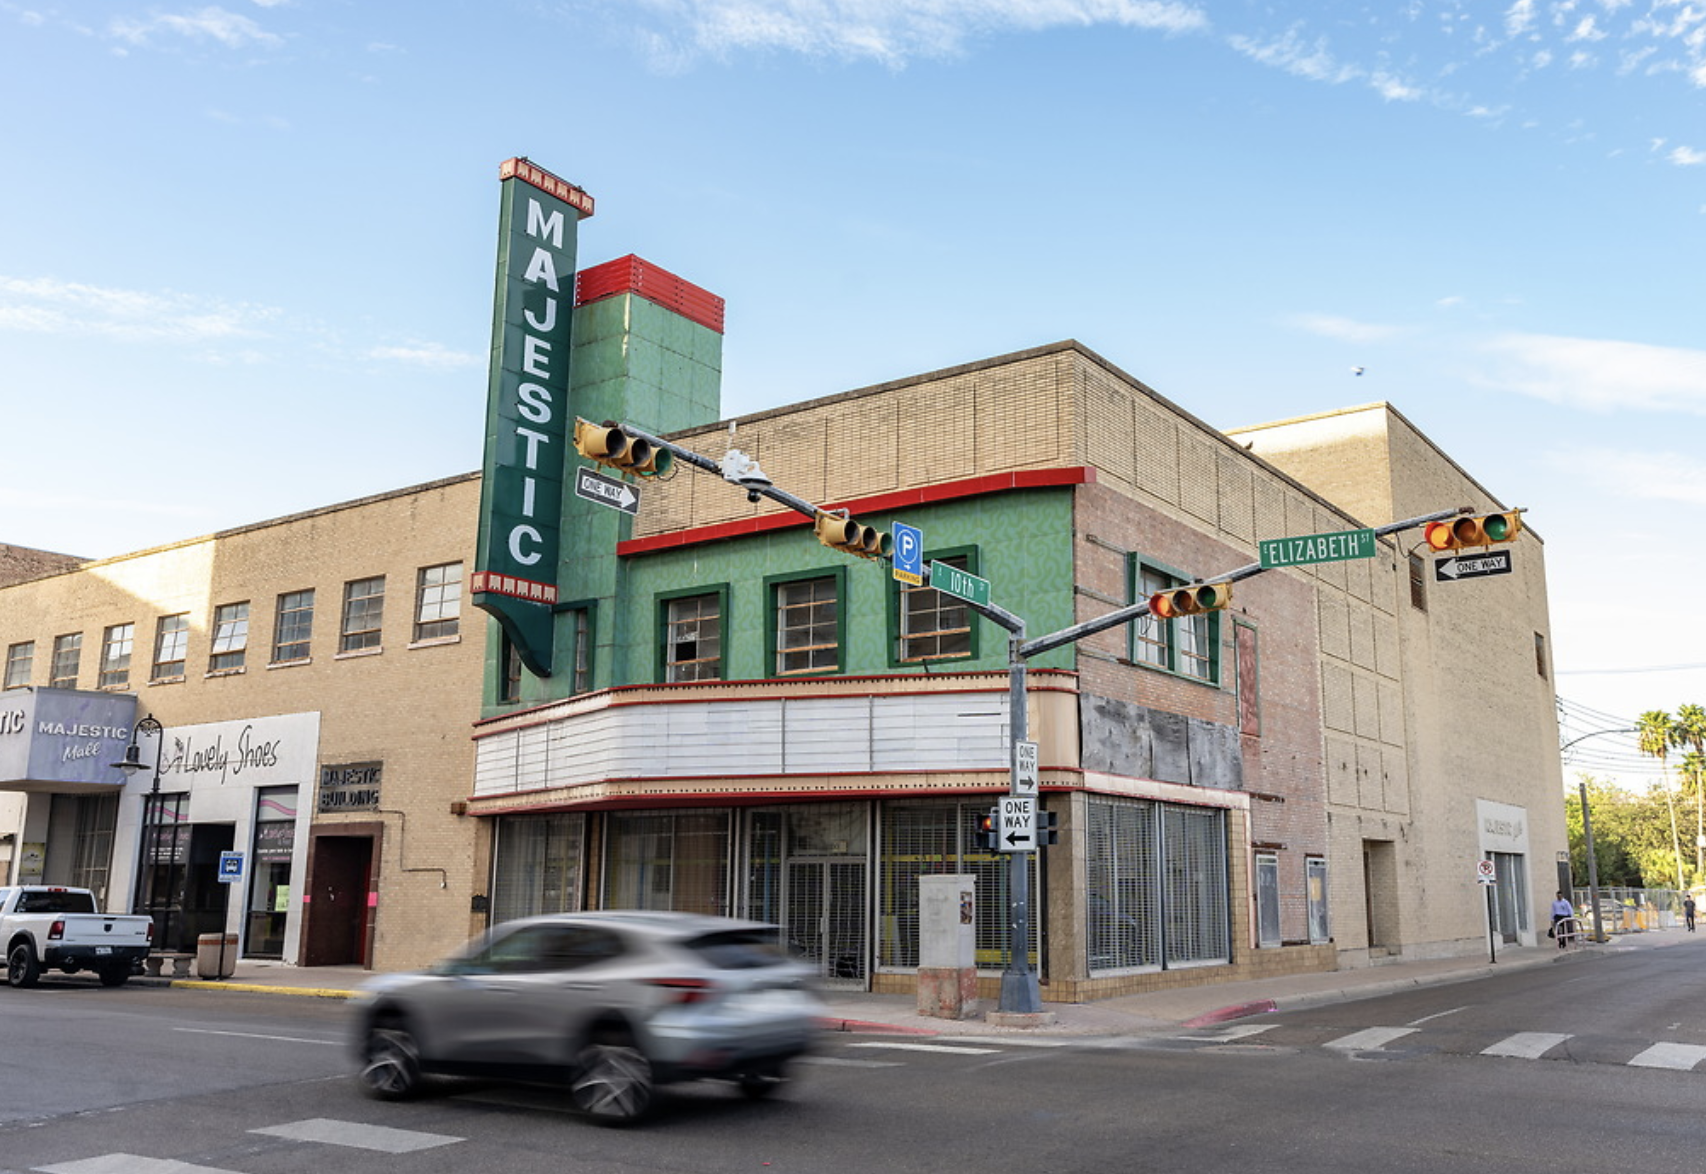 UTRGV officially purchases Majestic Theatre in Brownsville.